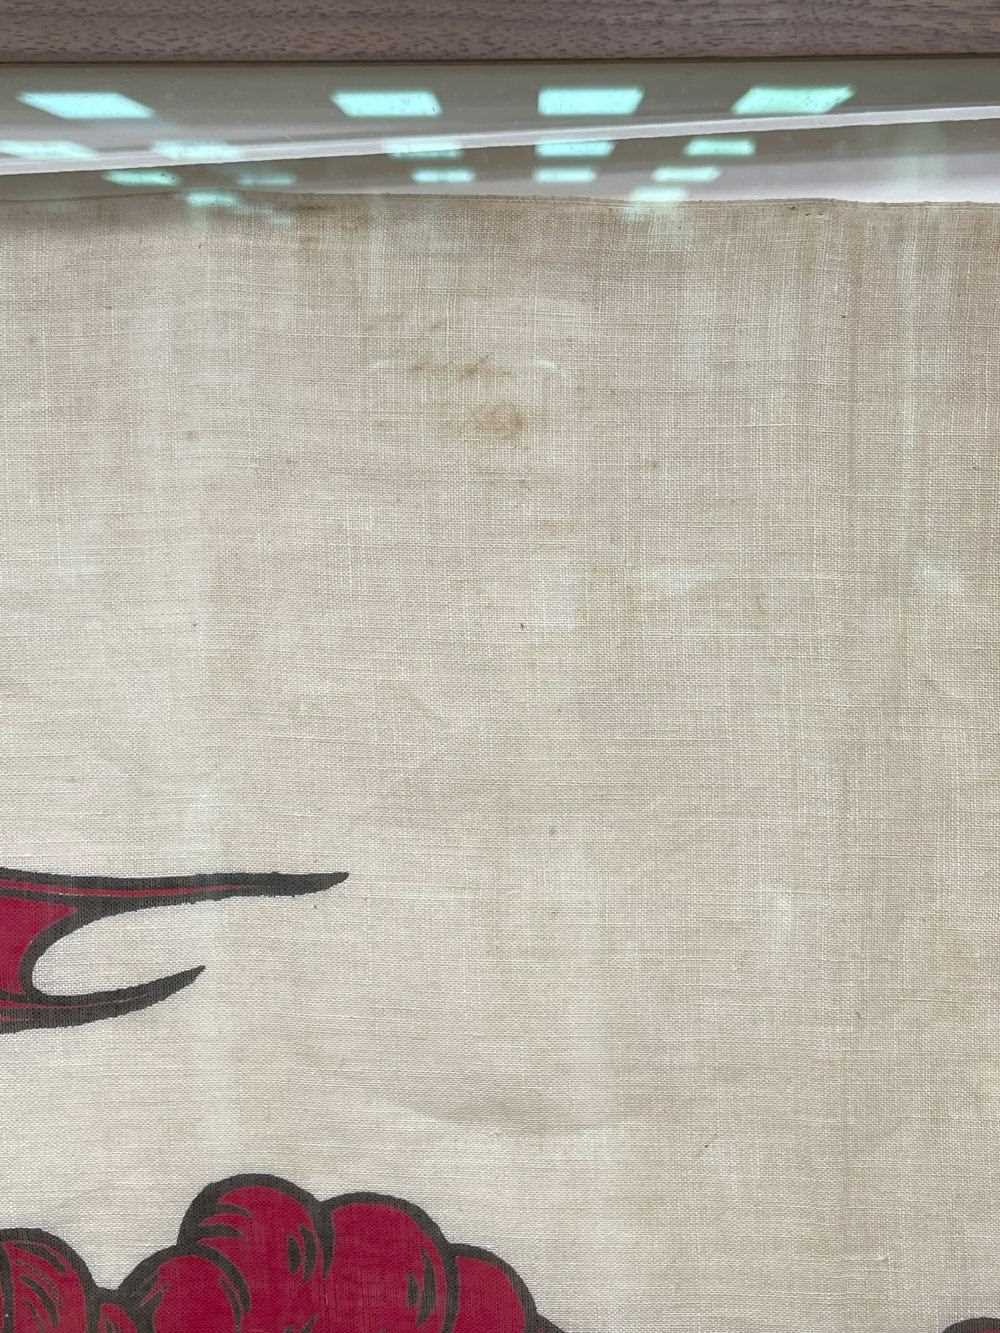 EARLY 20TH CENTURY WELSH FLAG (Y DDRAIG GOCH) with stitched edging and printed British made, 43 x - Image 7 of 21